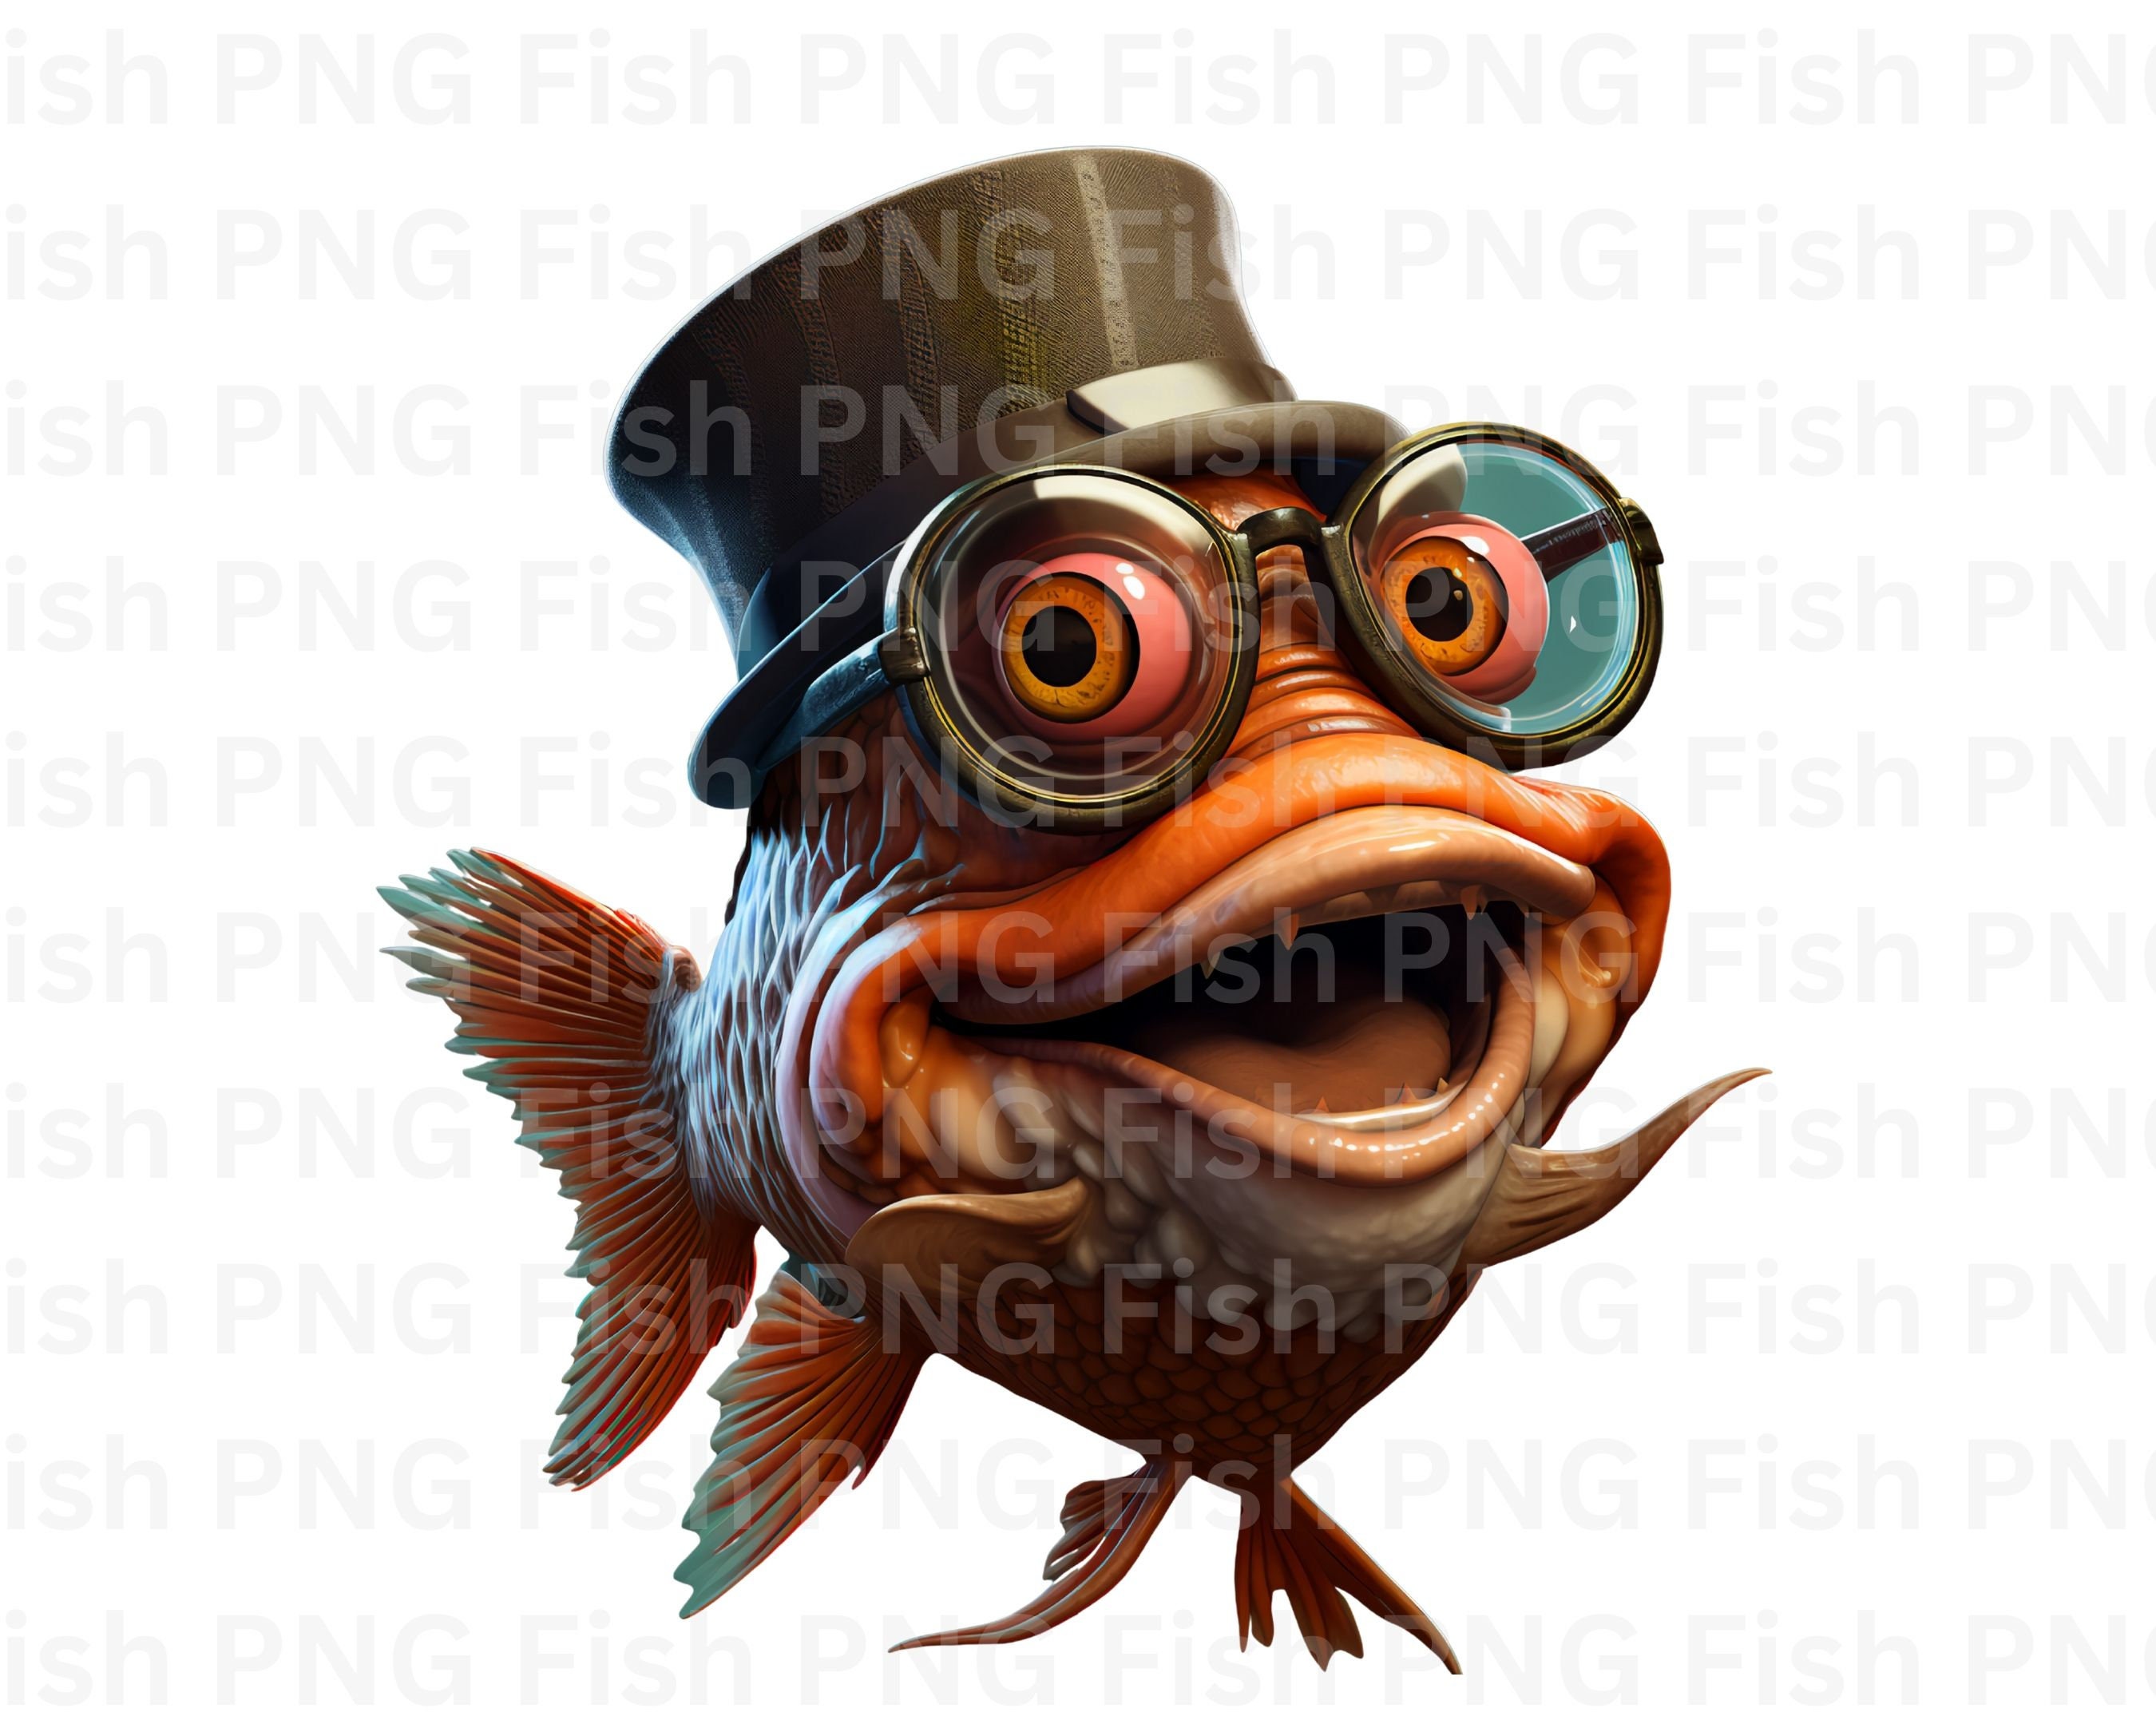 19 Fish Silly Faces Expressive Funny Fish With Hat and Sunglasses Fish PNG  Clip Art Fish PNG Commercial Use for Print on Demand 